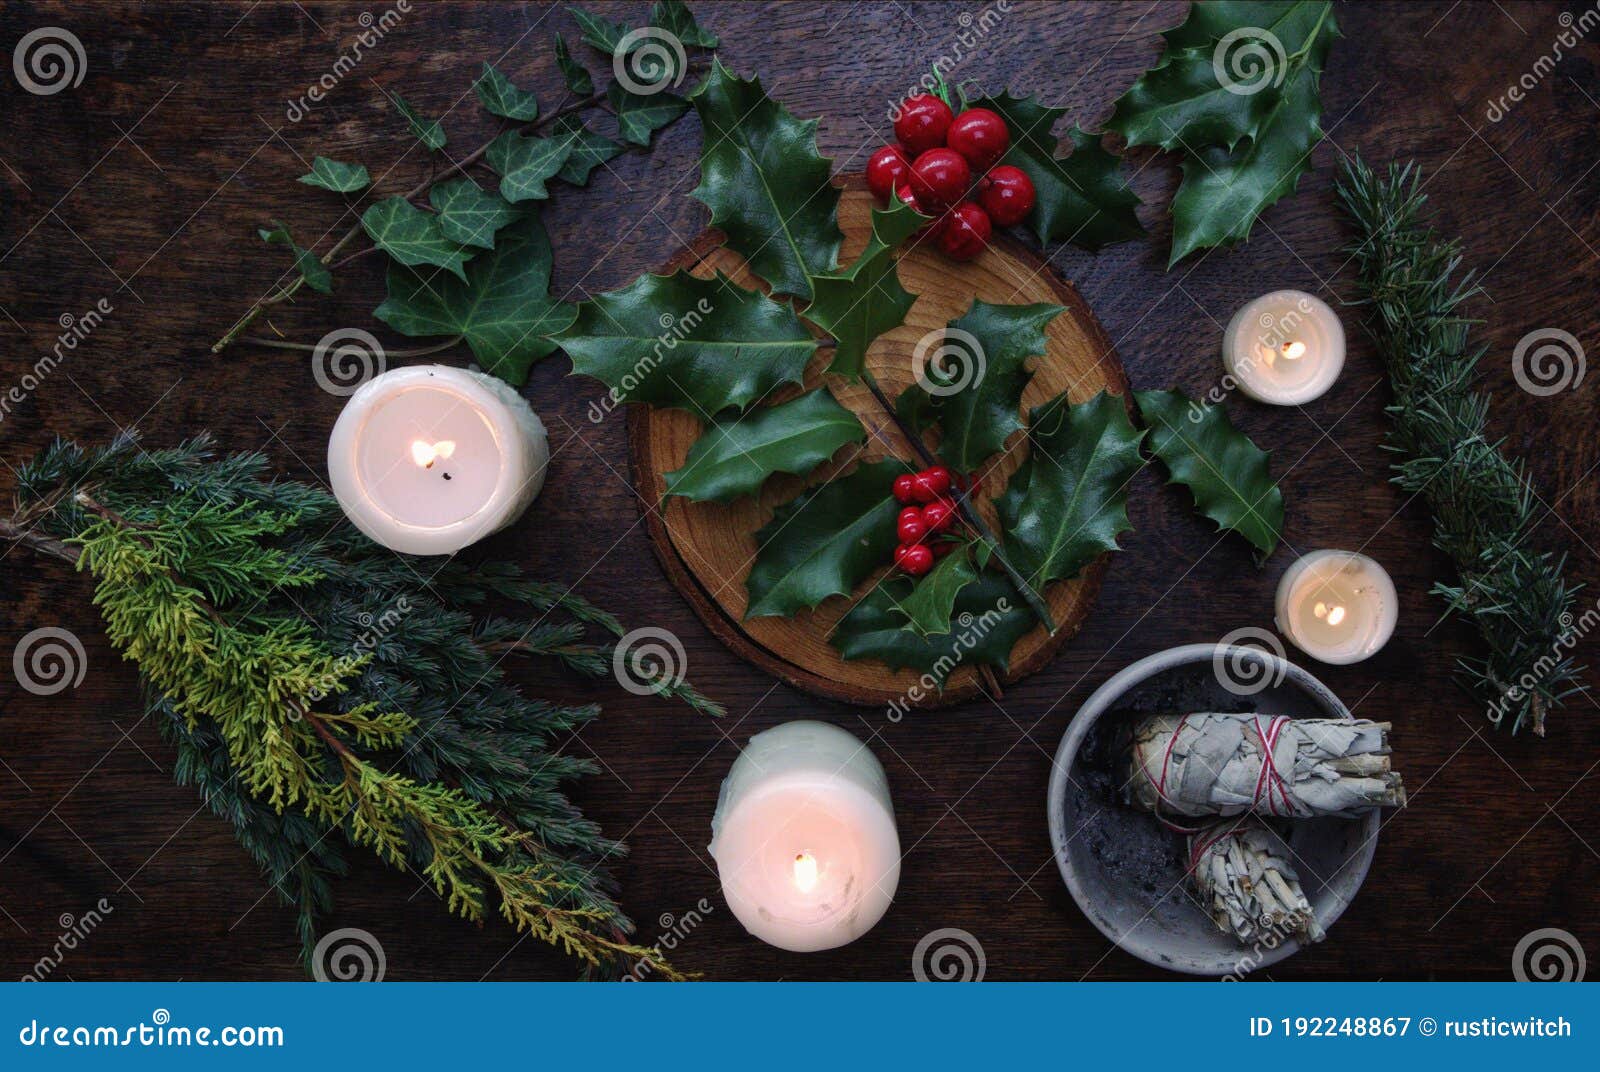 yule winter solstice christmas themed flat lay with branch of holly plant on a dark wooden table